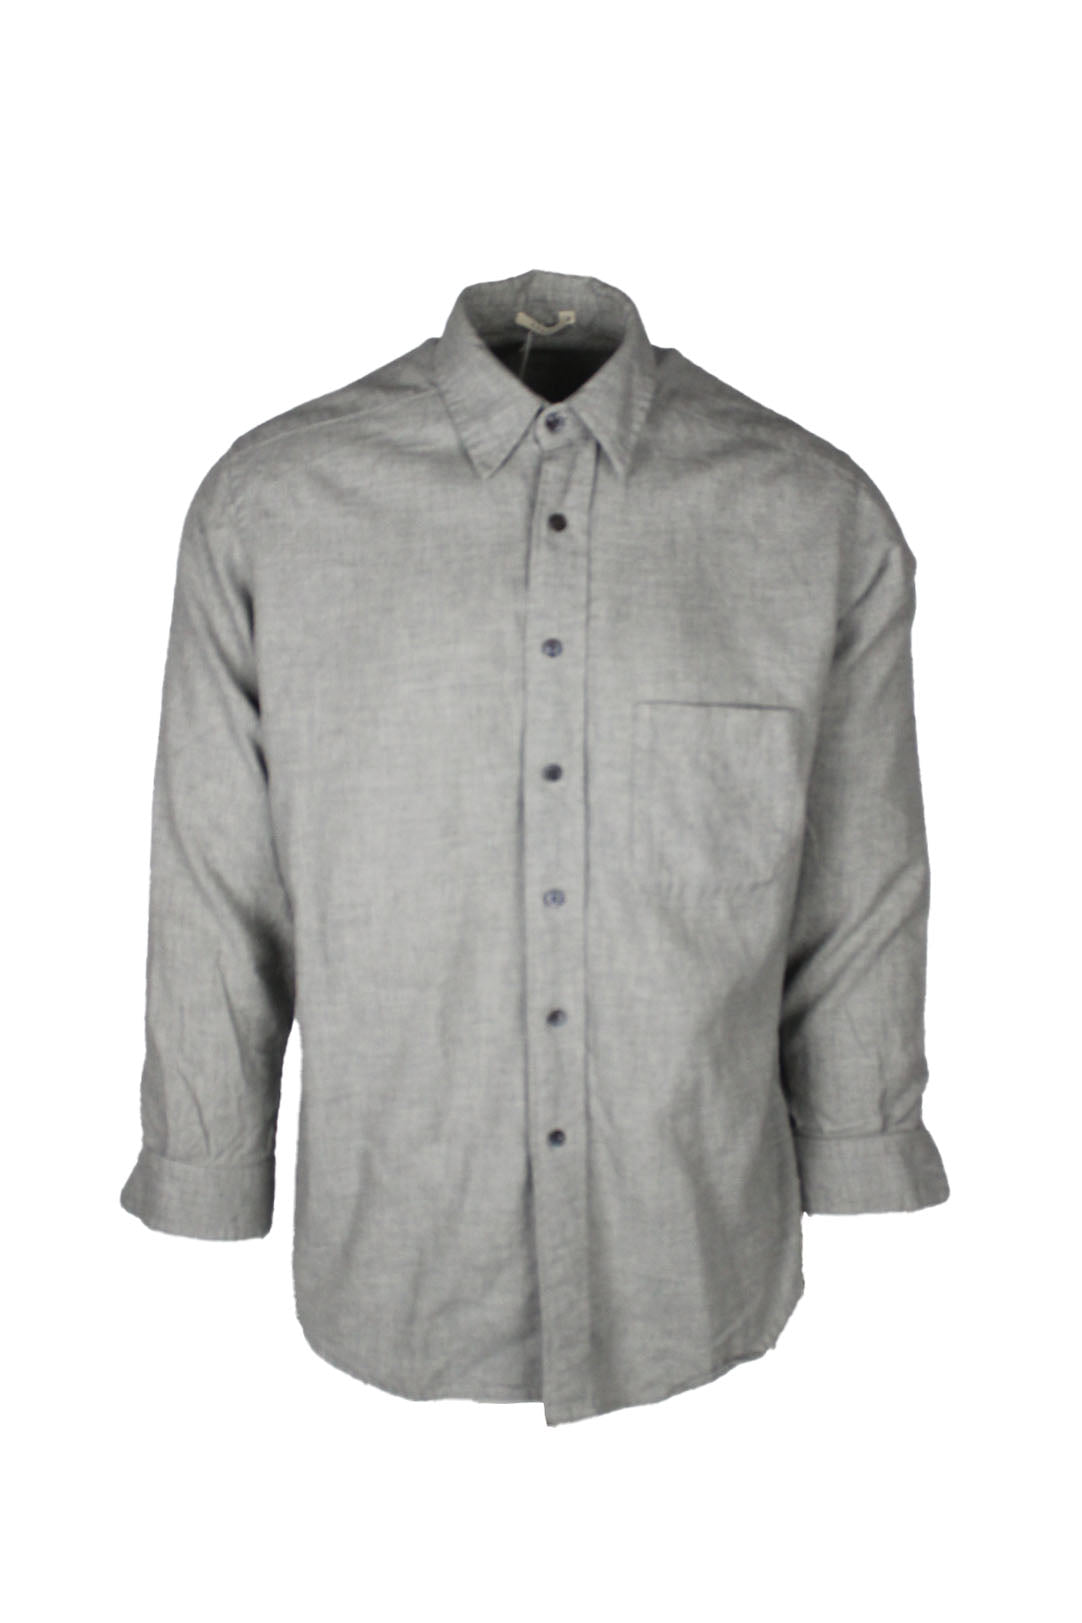 front view of 6397 grey long sleeve button up cotton shirt. features left breast pocket and buttons at cuffs.